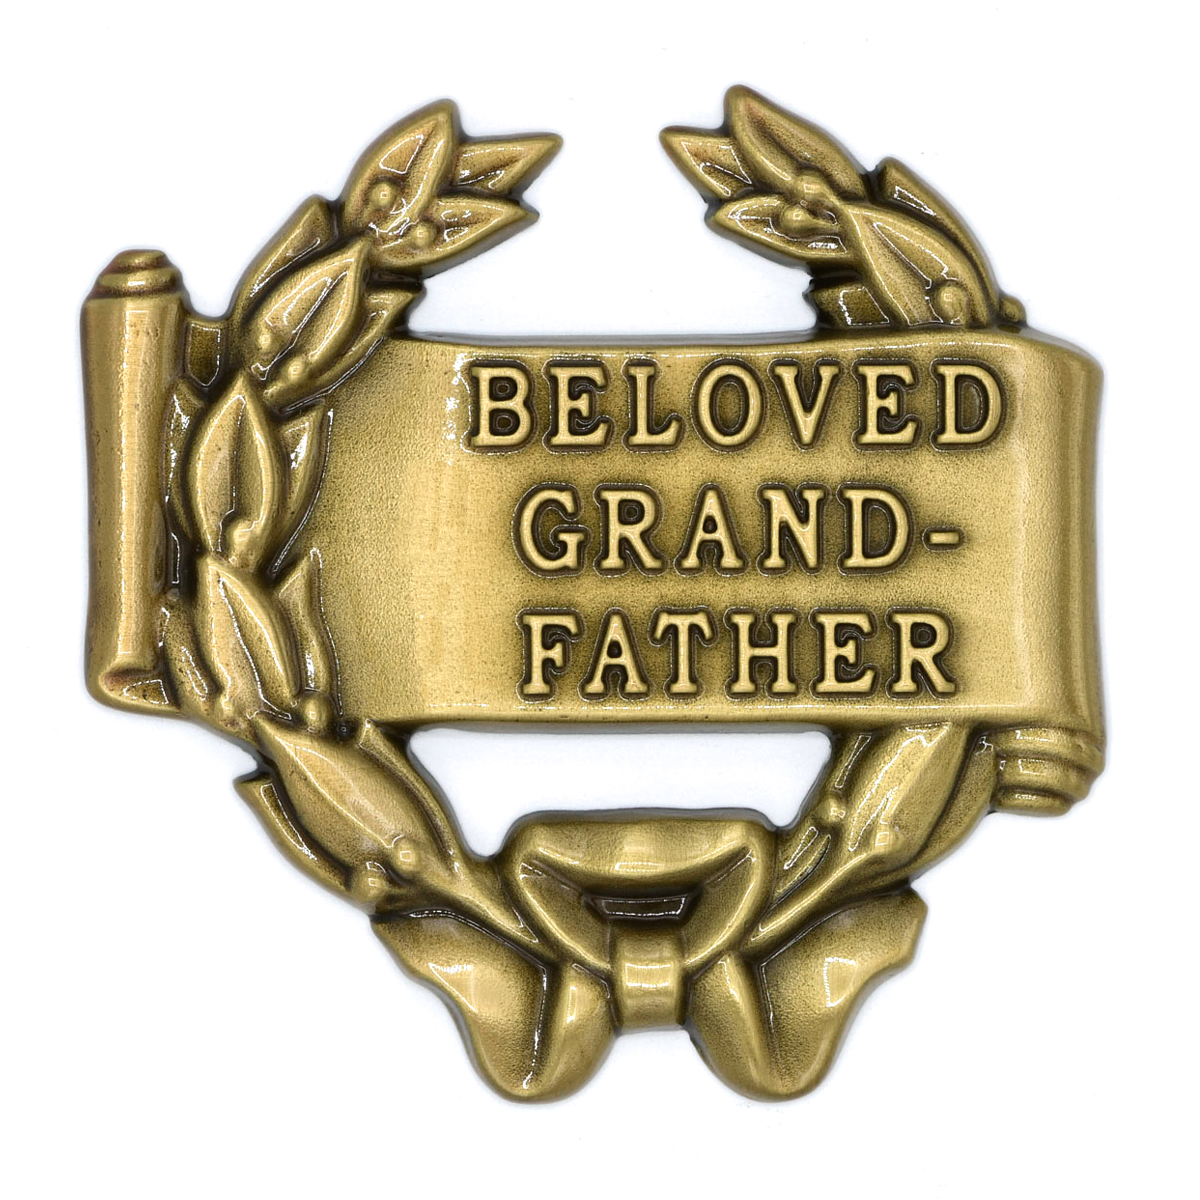 Beloved Grand-Father 3.1 x 3.1″